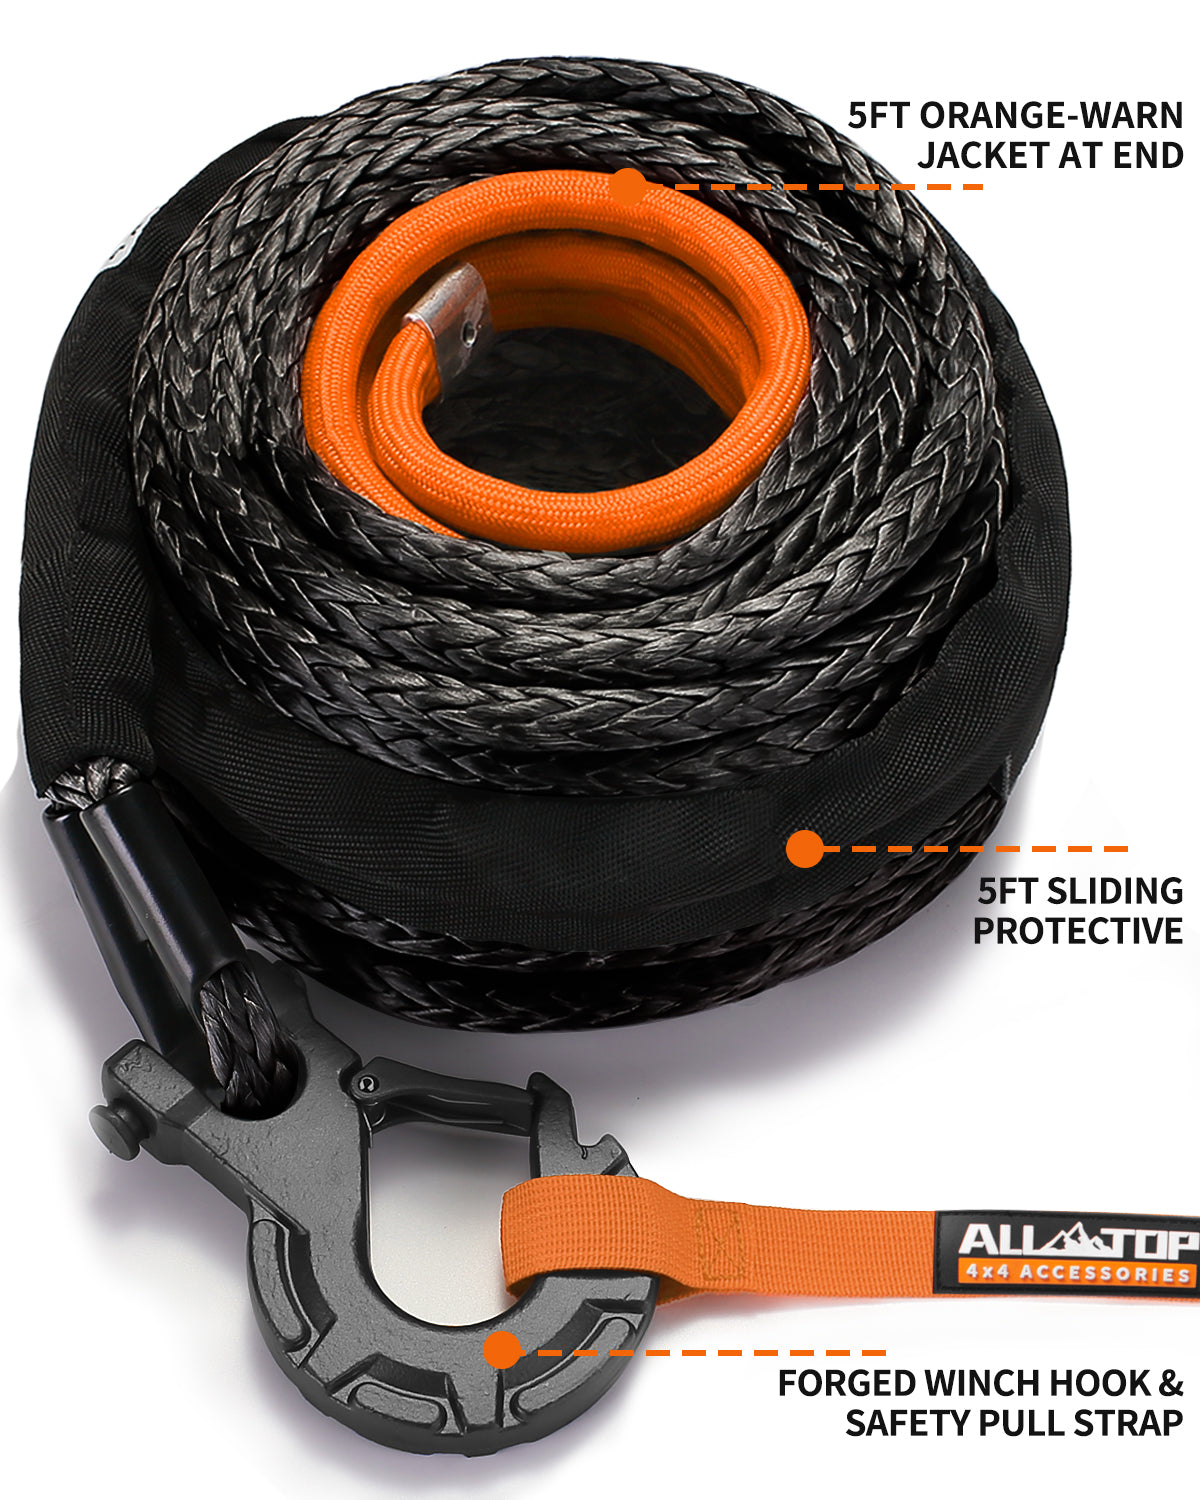 Synthetic Winch Cable w/ Forged Winch Hook - 3/8in x 92ft